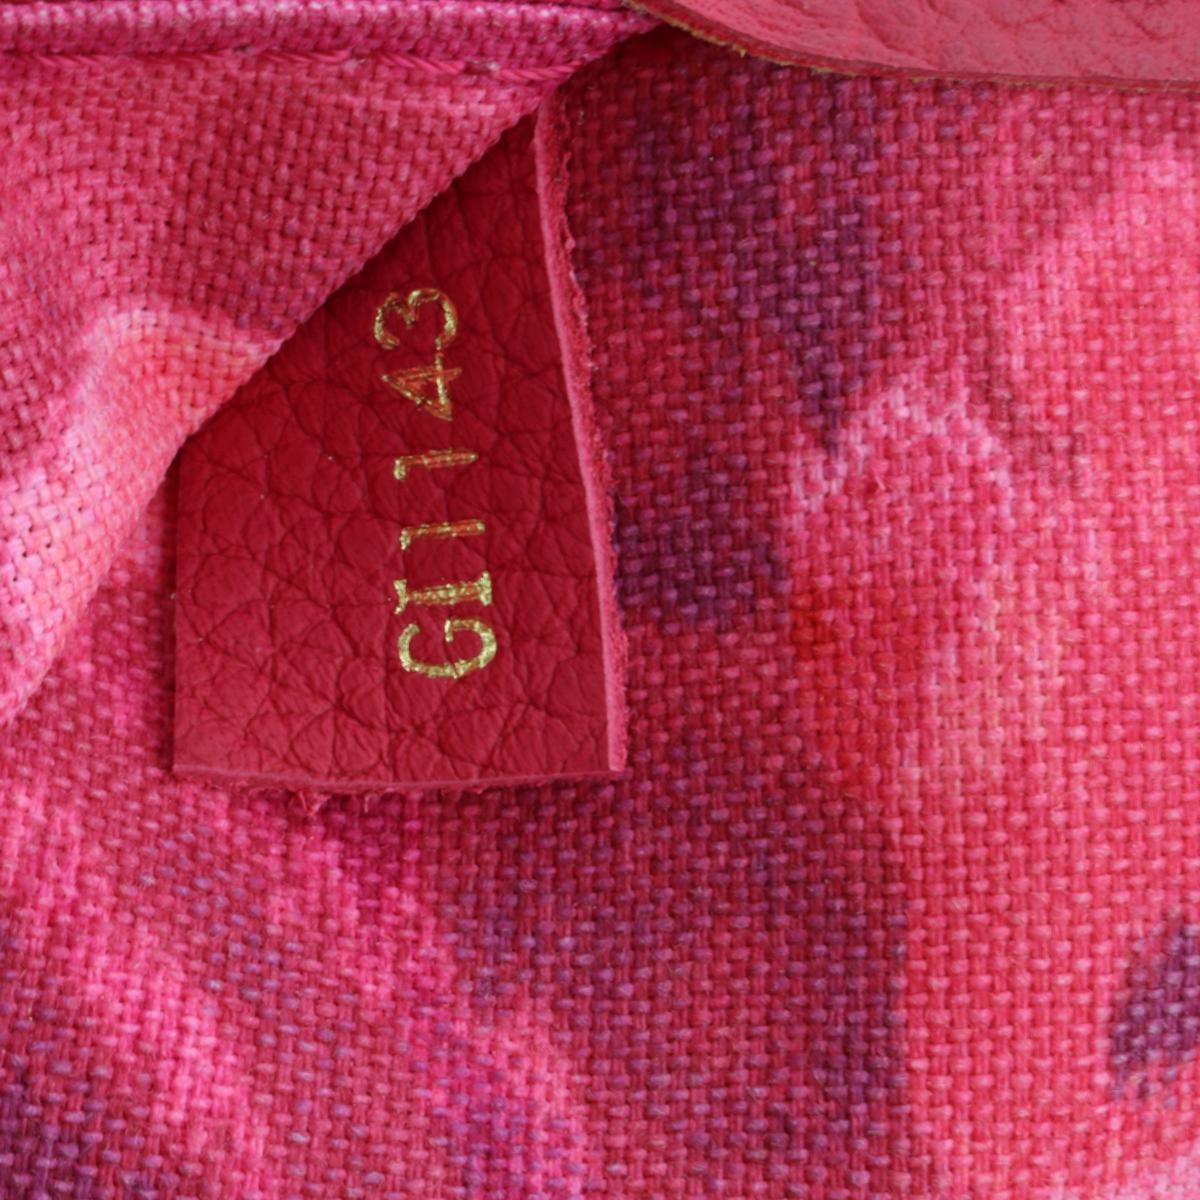 Louis Vuitton Neverfull MM Ikat Bag in Monogram Fuchsia 2013 Limited Edition For Sale 15